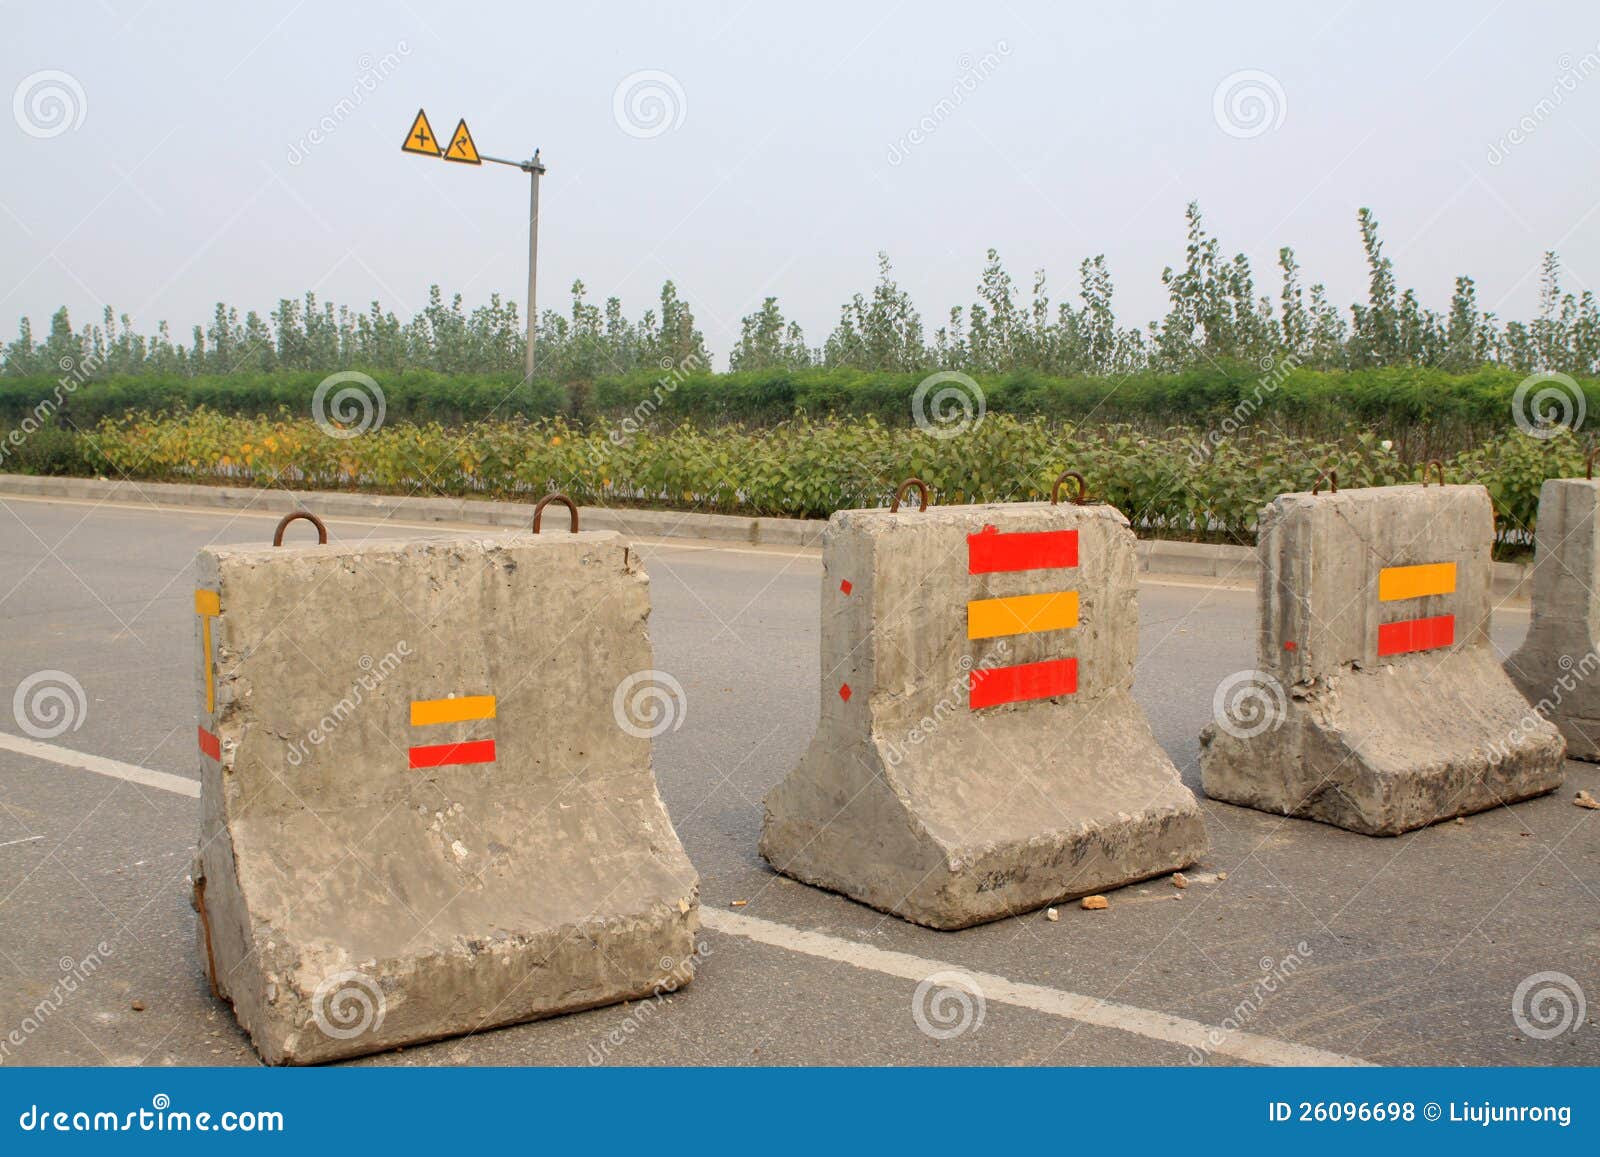 obstacles on the road